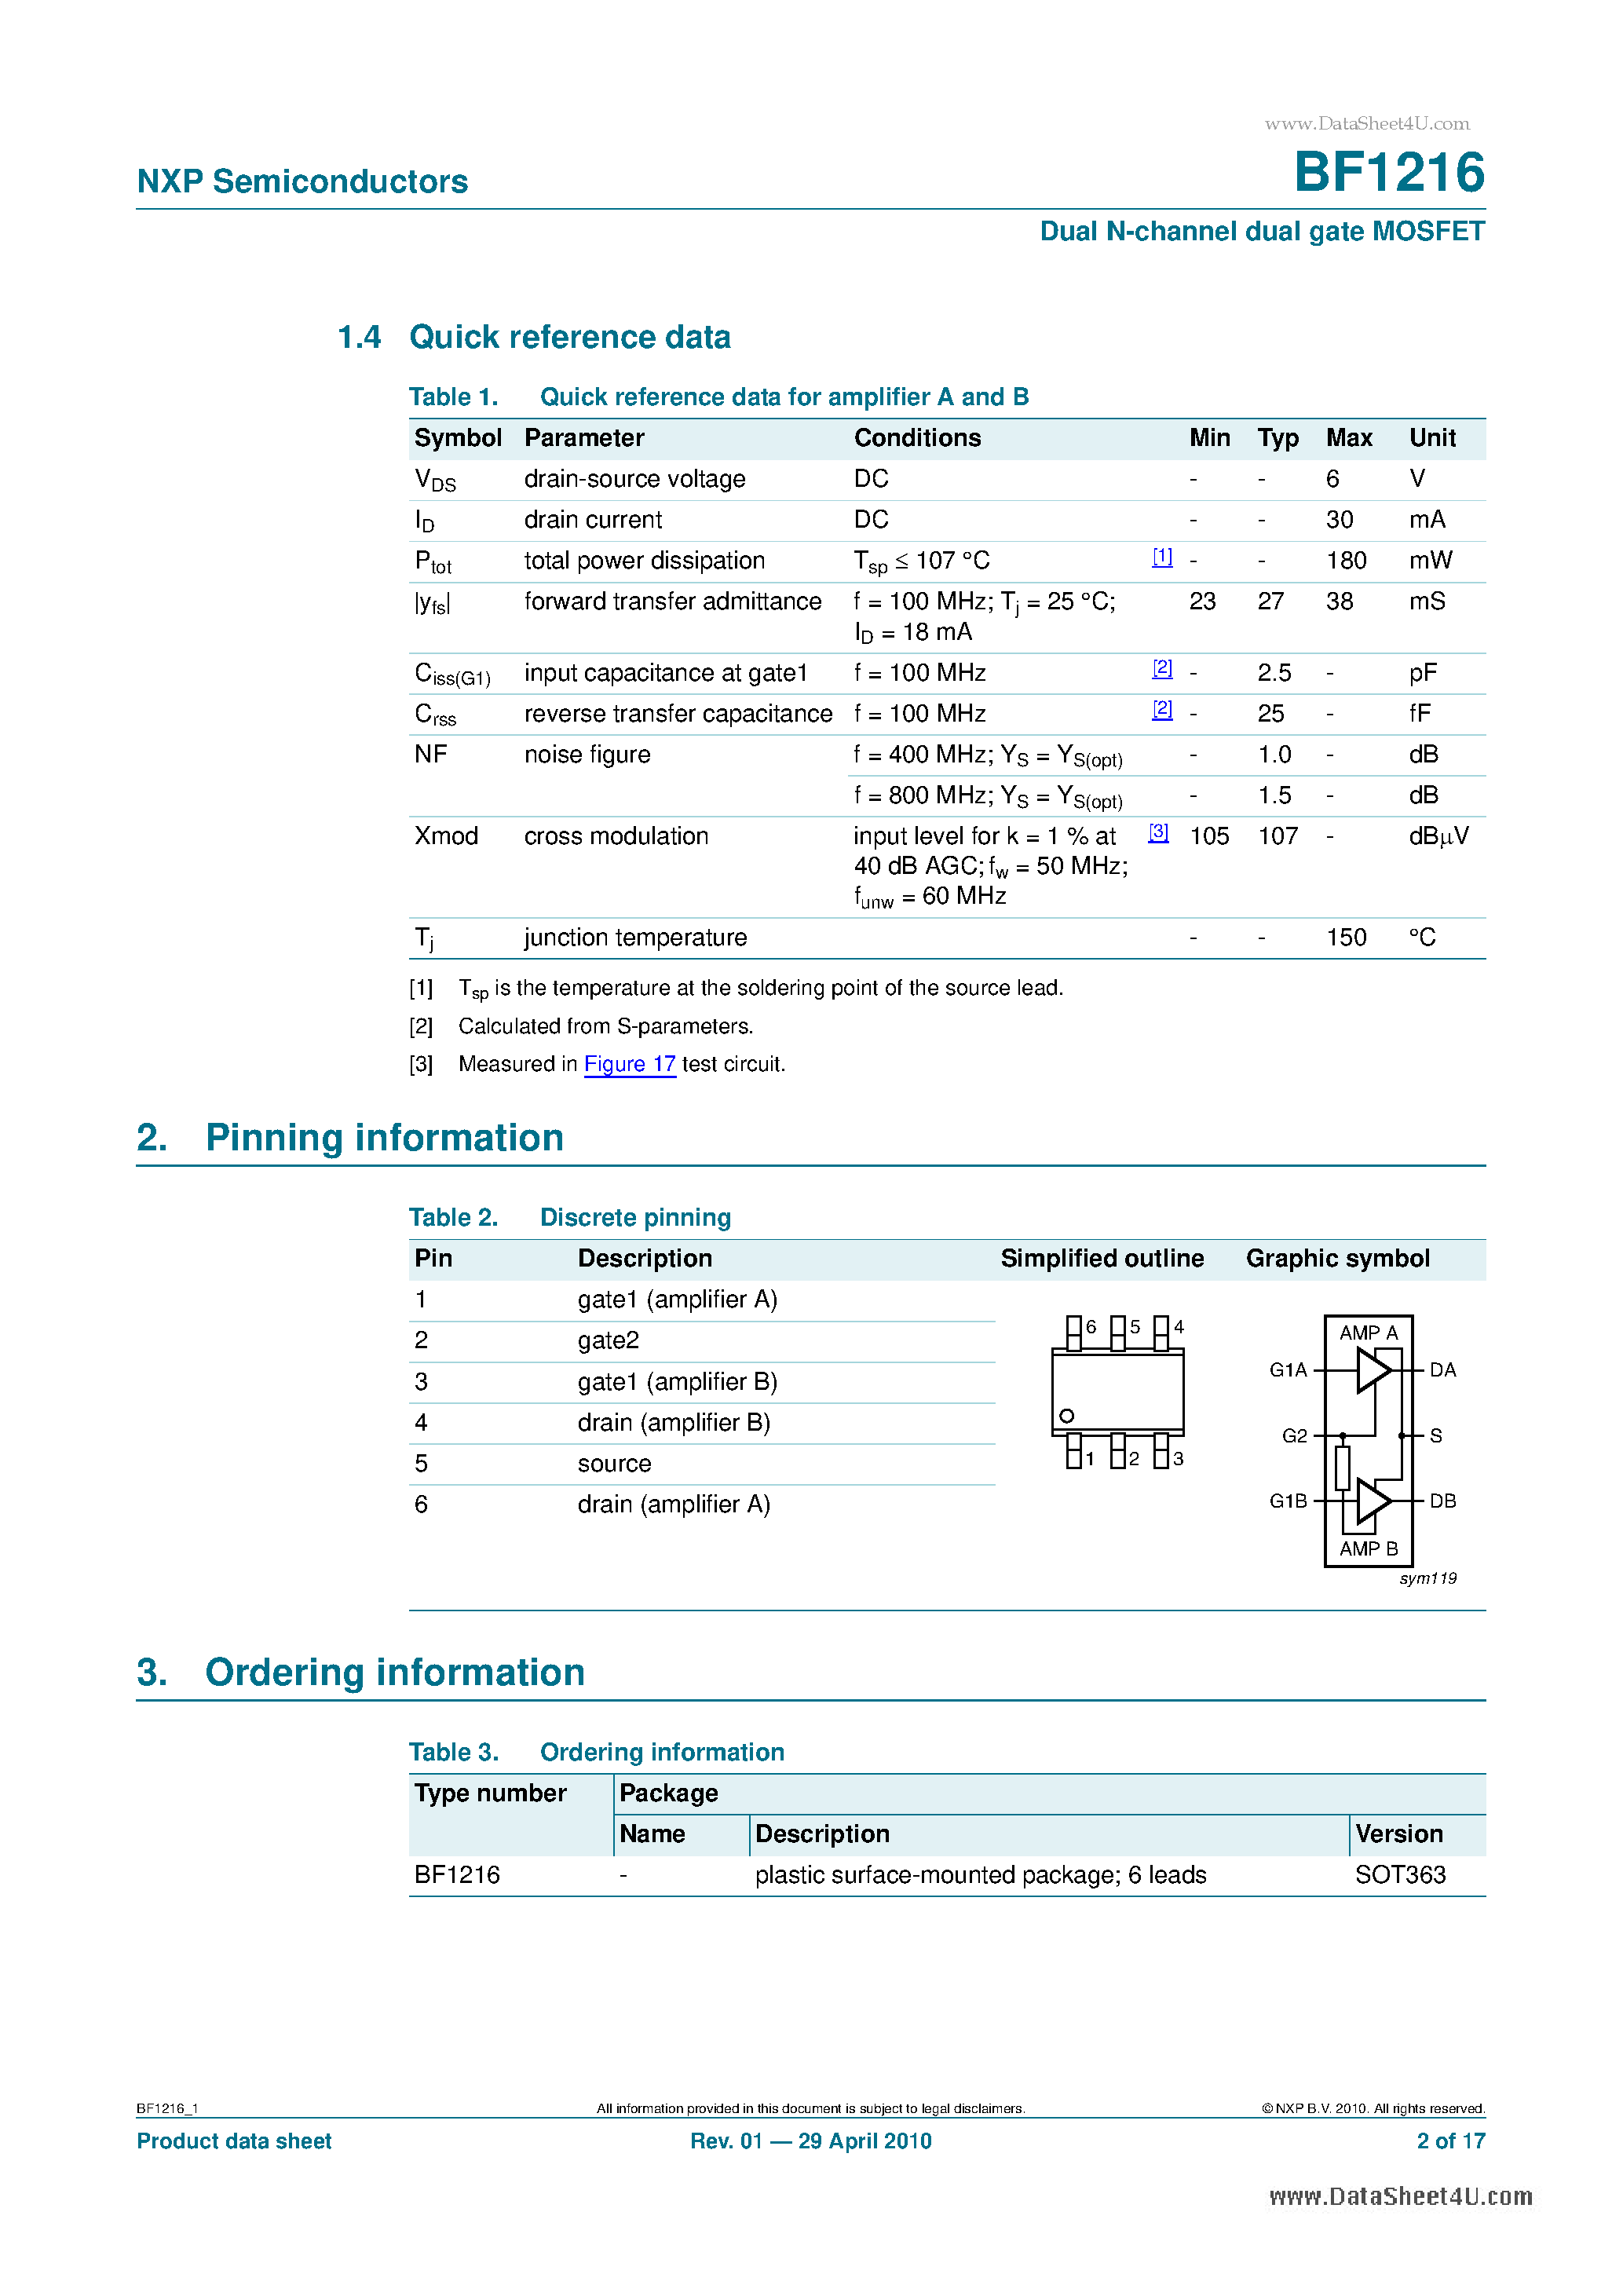 Datasheet BF1216 - Dual N-channel dual gate MOSFET page 2